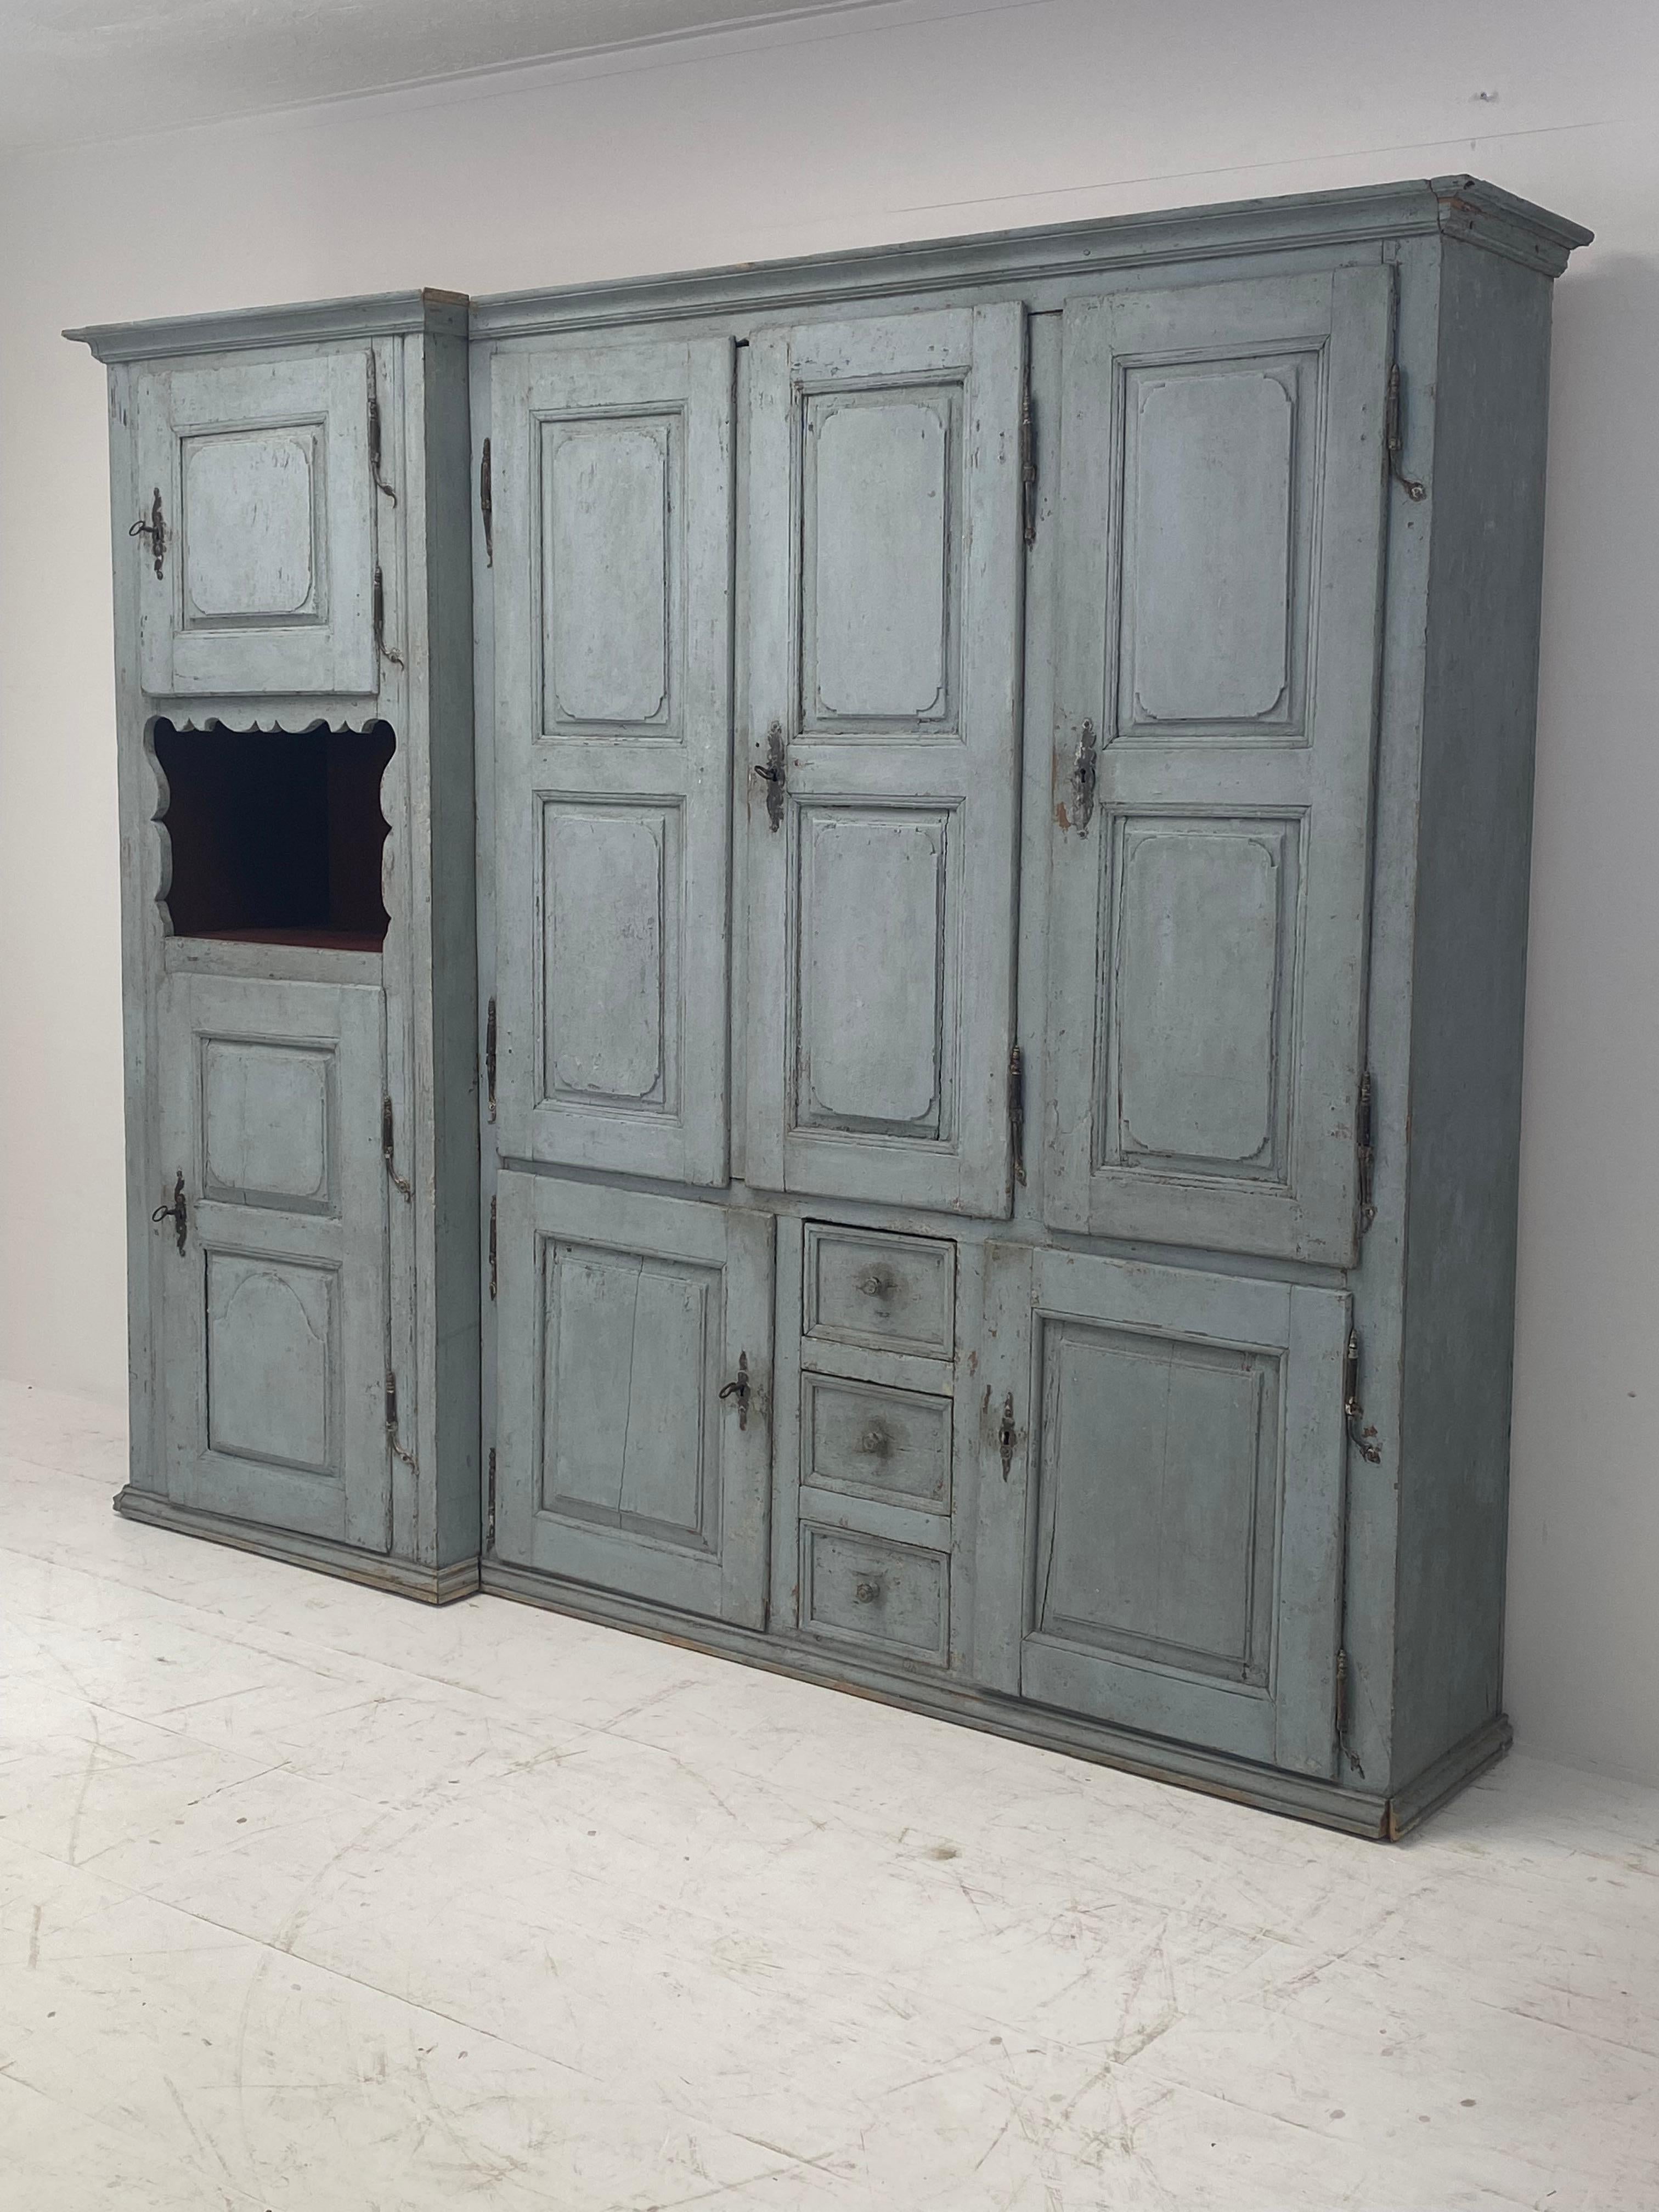 Exceptional, rustic French Cupboard in a original patinated Wood,
from the Eastern part of France,has its Italian Influence,
from around 1780,
extremely beautiful original Blue/Grey Color and Patina,combined with a warm Red color the